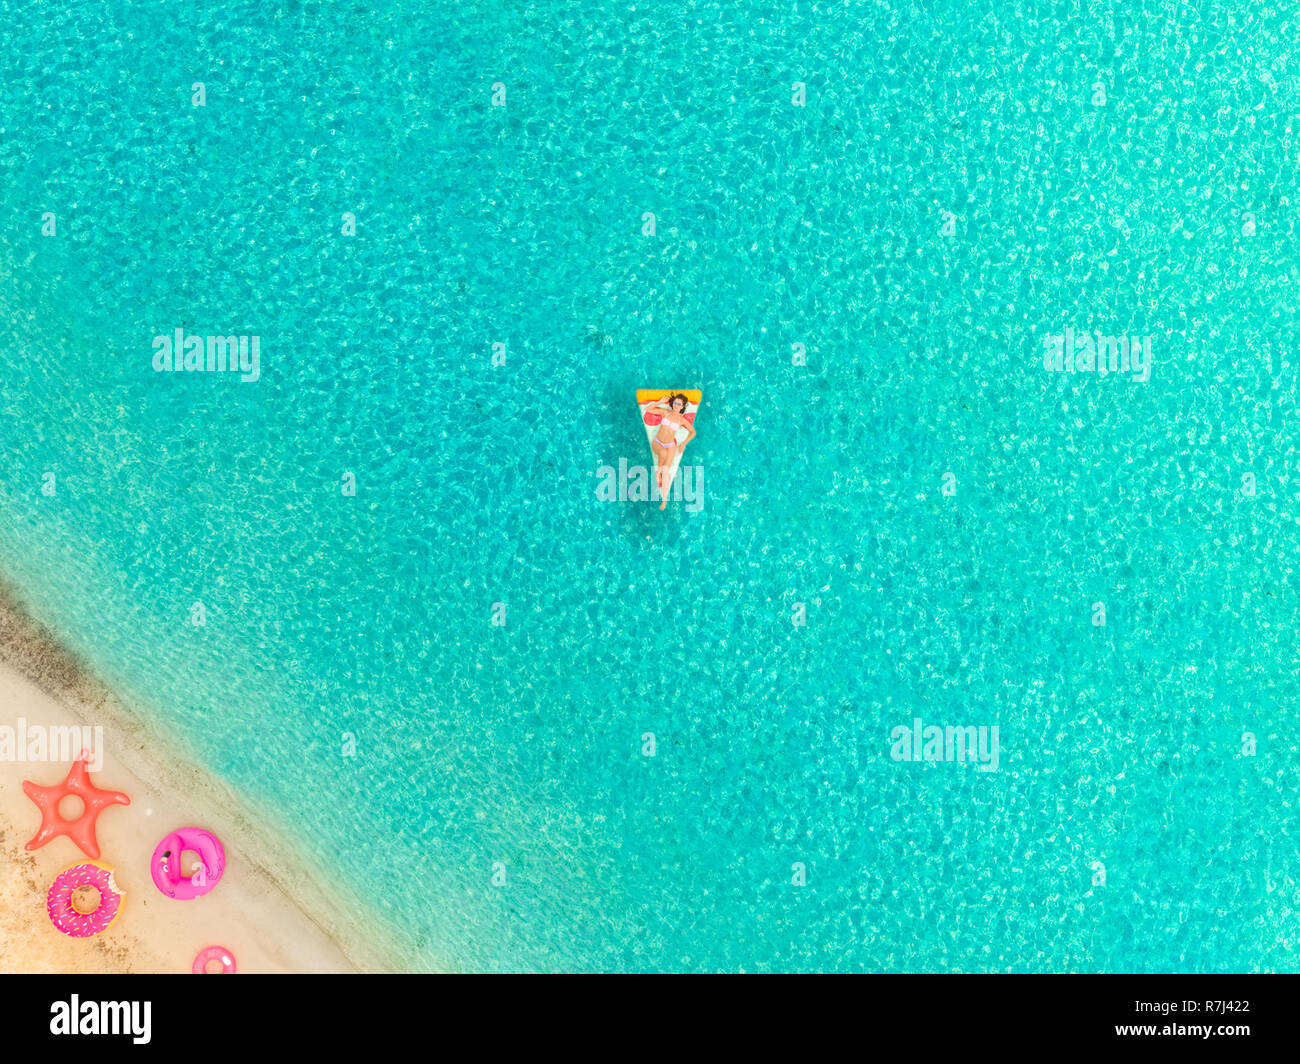 Aerial view of woman floating on inflatable pizza mattress by sandy beach and inflatable rings. Stock Photo